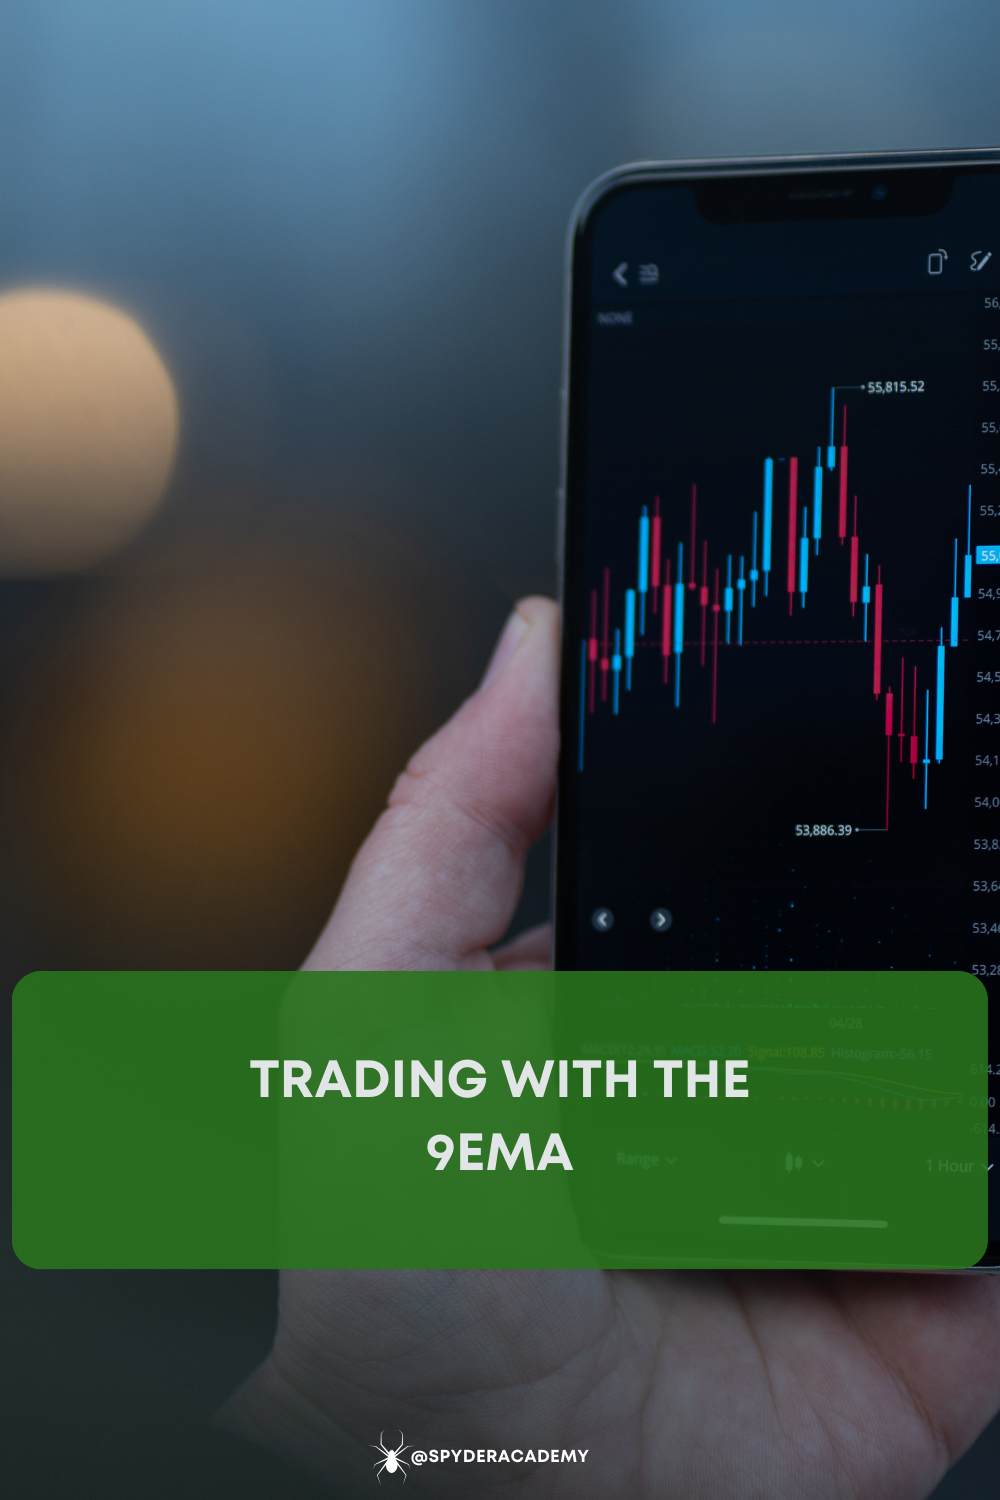 Explore the best EMA settings for day trading in 'Mastering Moving Averages' by CashMoneyTrades. Learn to use the 9 EMA for market trend analysis and strategy development in day trading. This guide covers EMA fundamentals, trend identification, and integration with other indicators for improved trading decisions. Ideal for both new and experienced traders.